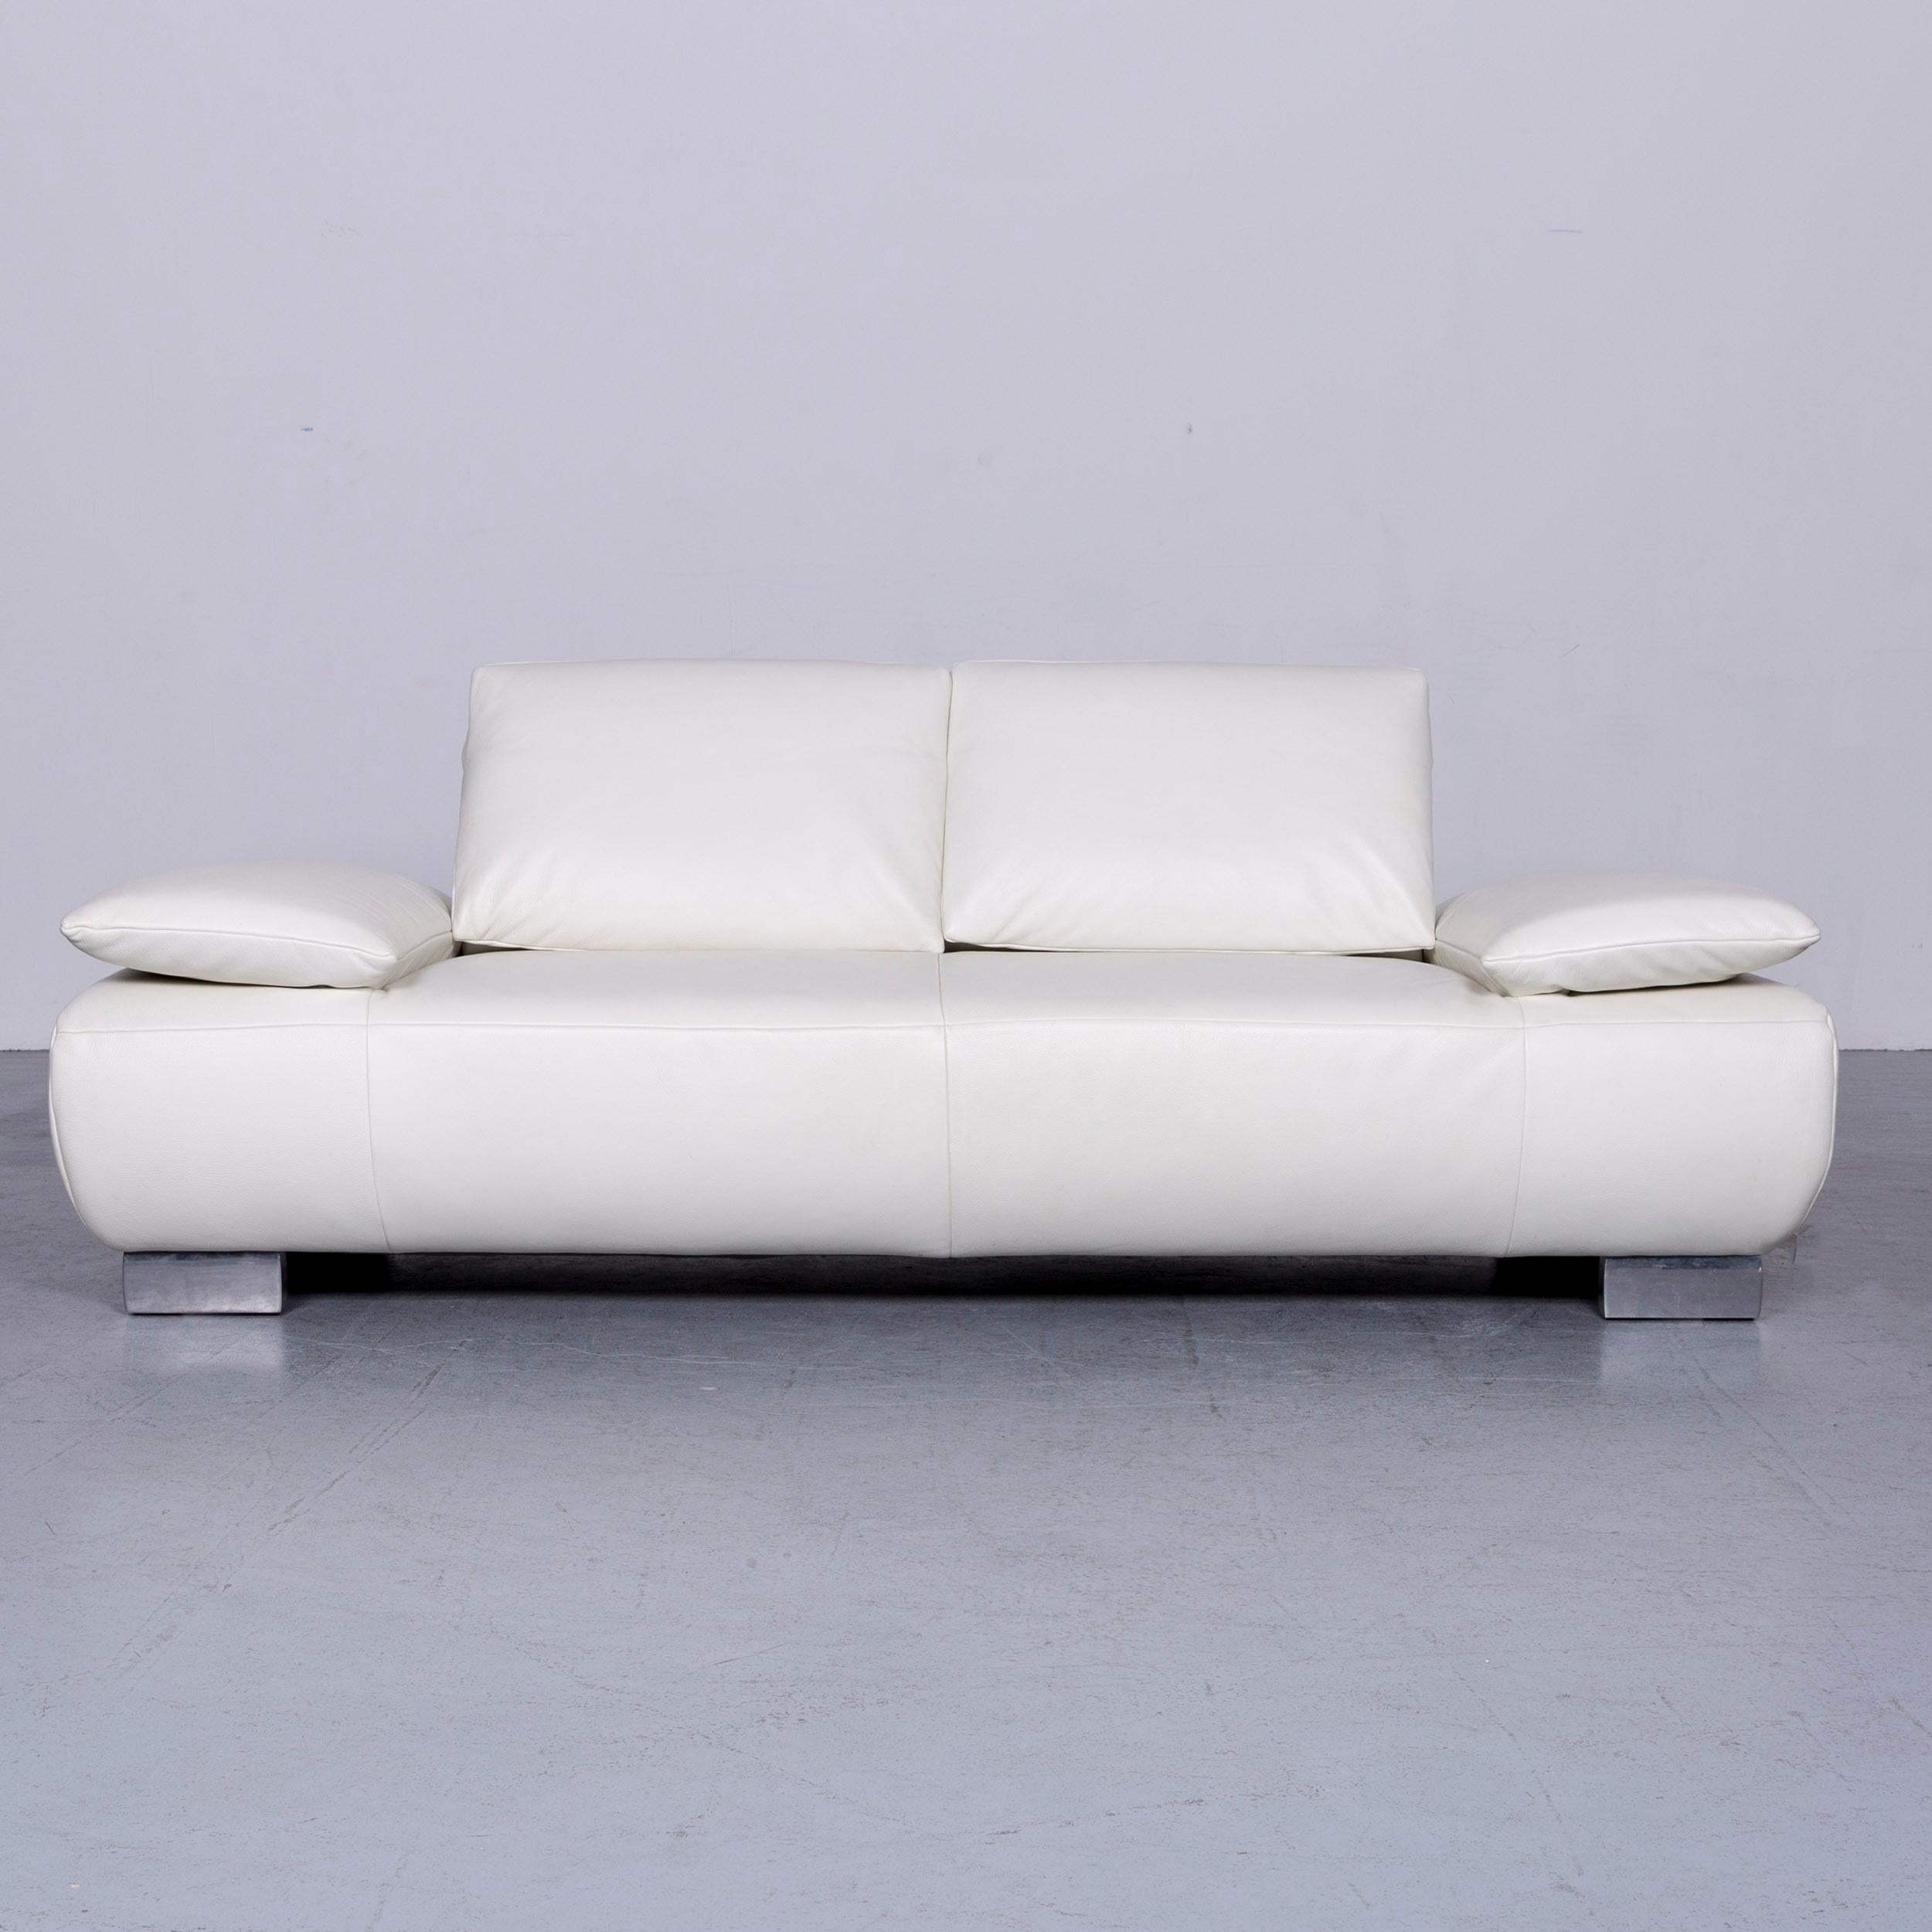 German Koinor Volare Designer Sofa Set White Three-Seat Leather Couch with Function